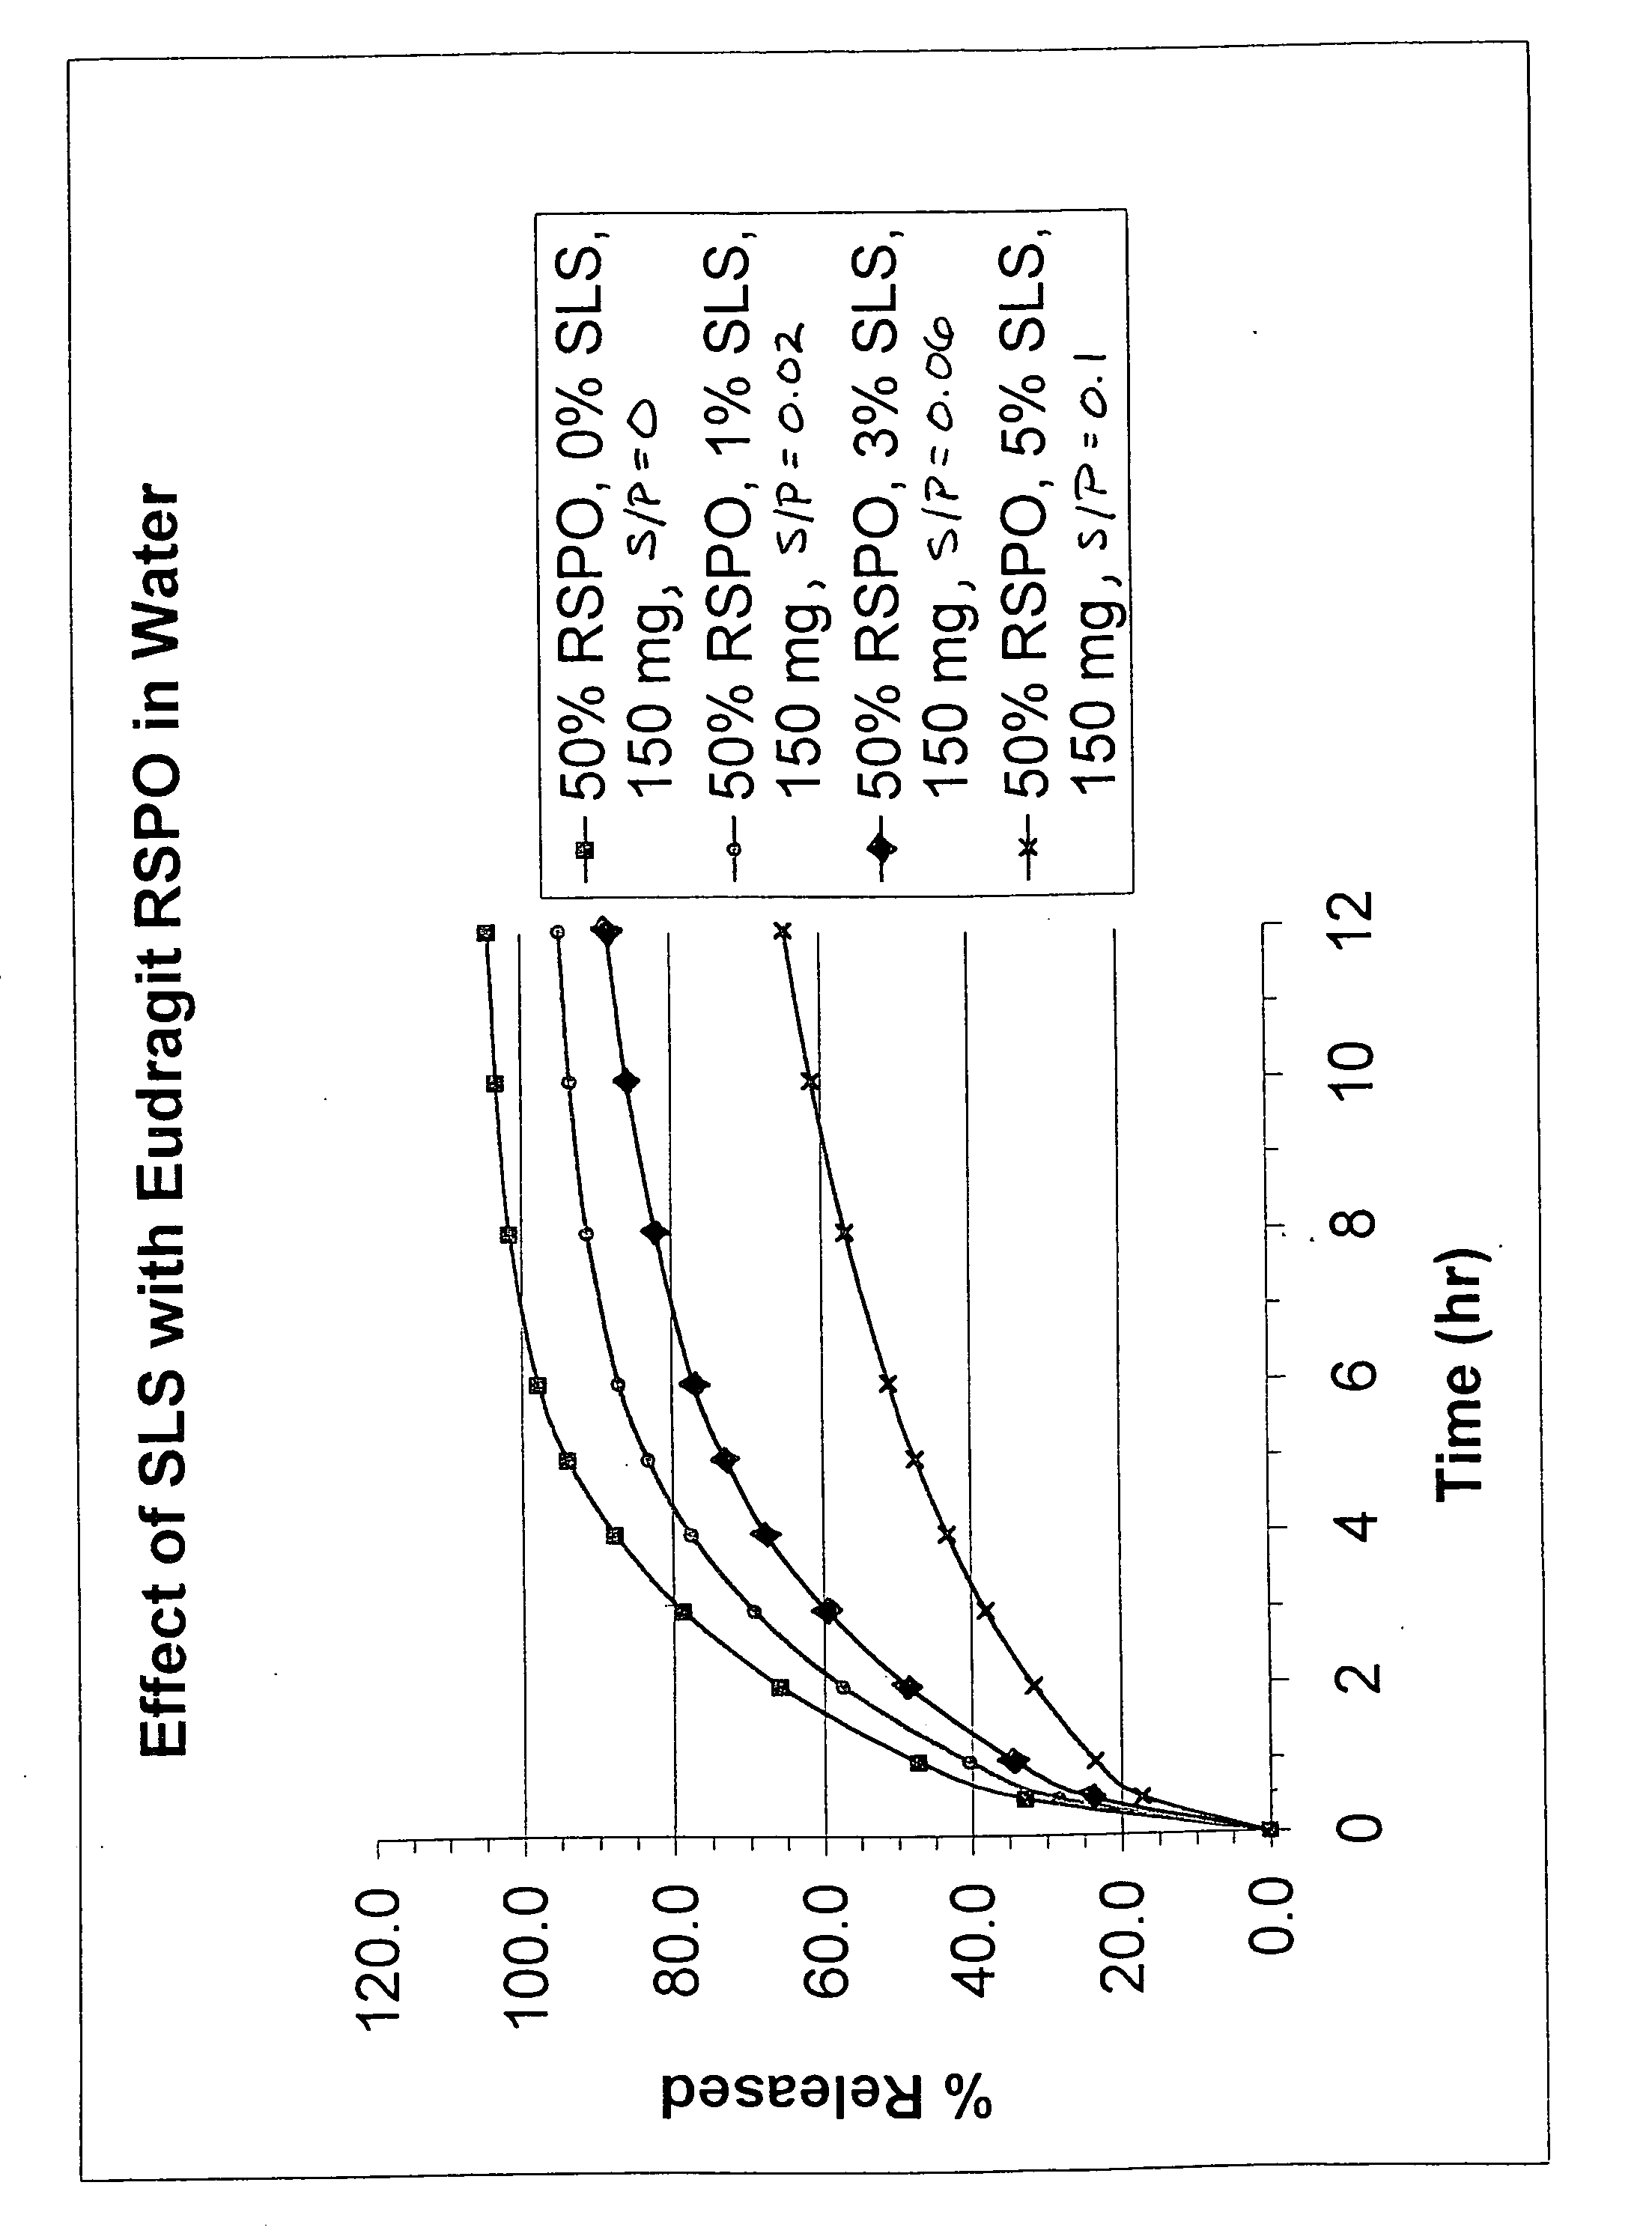 Sustained release oxycodone composition with acrylic polymer and surfactant